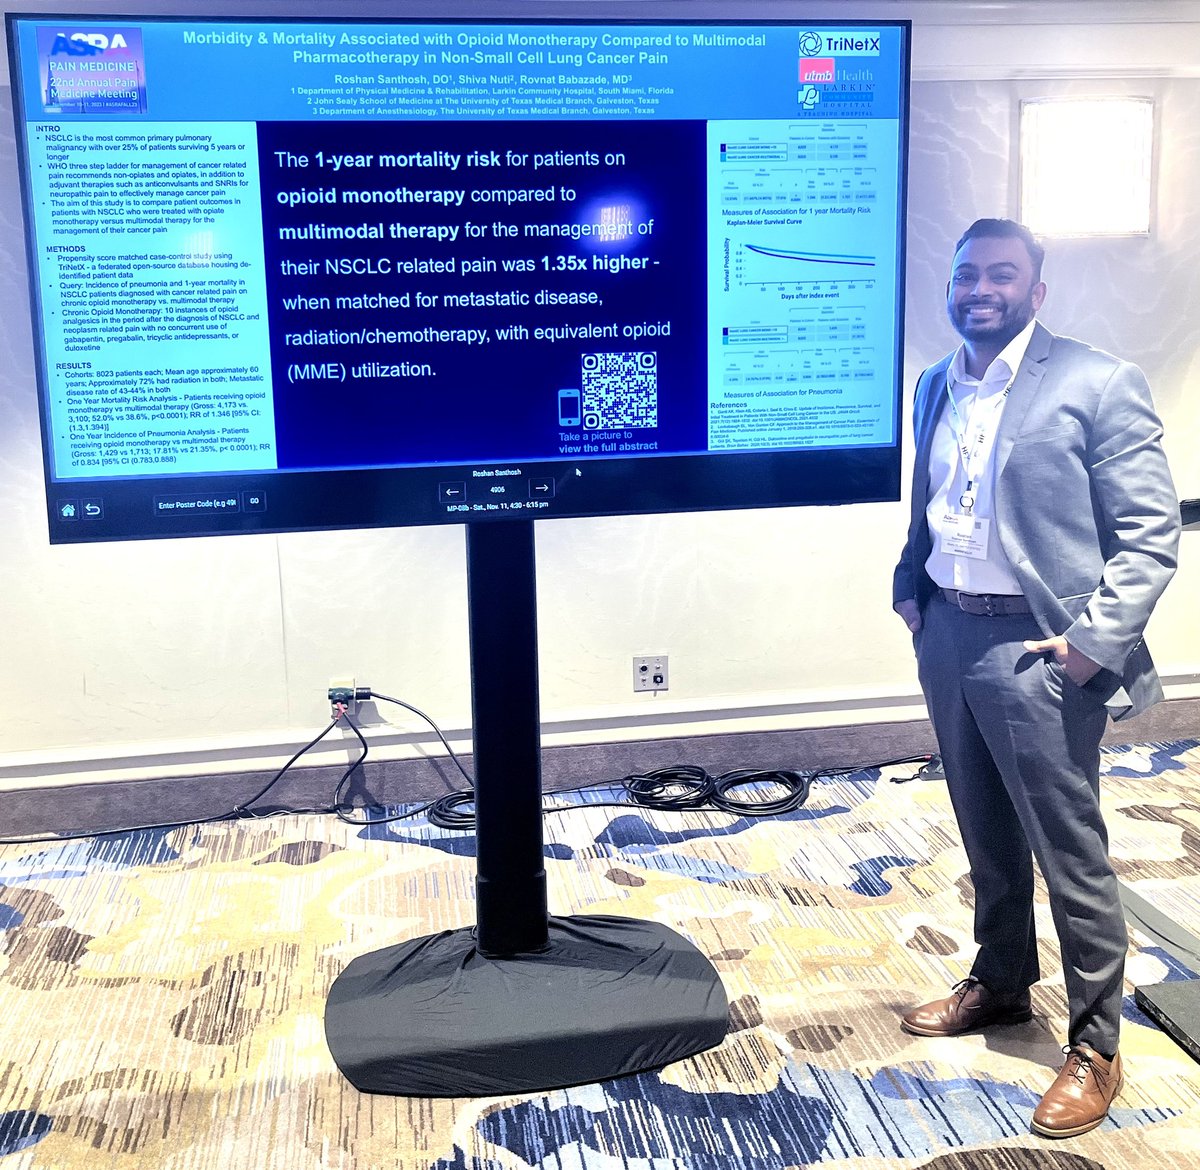 I had an amazing experience connecting with future colleagues and leaders in the field at #ASRAFALL23. Thankful for the opportunity to present some of my work and learn more about the wonderful field of pain medicine!